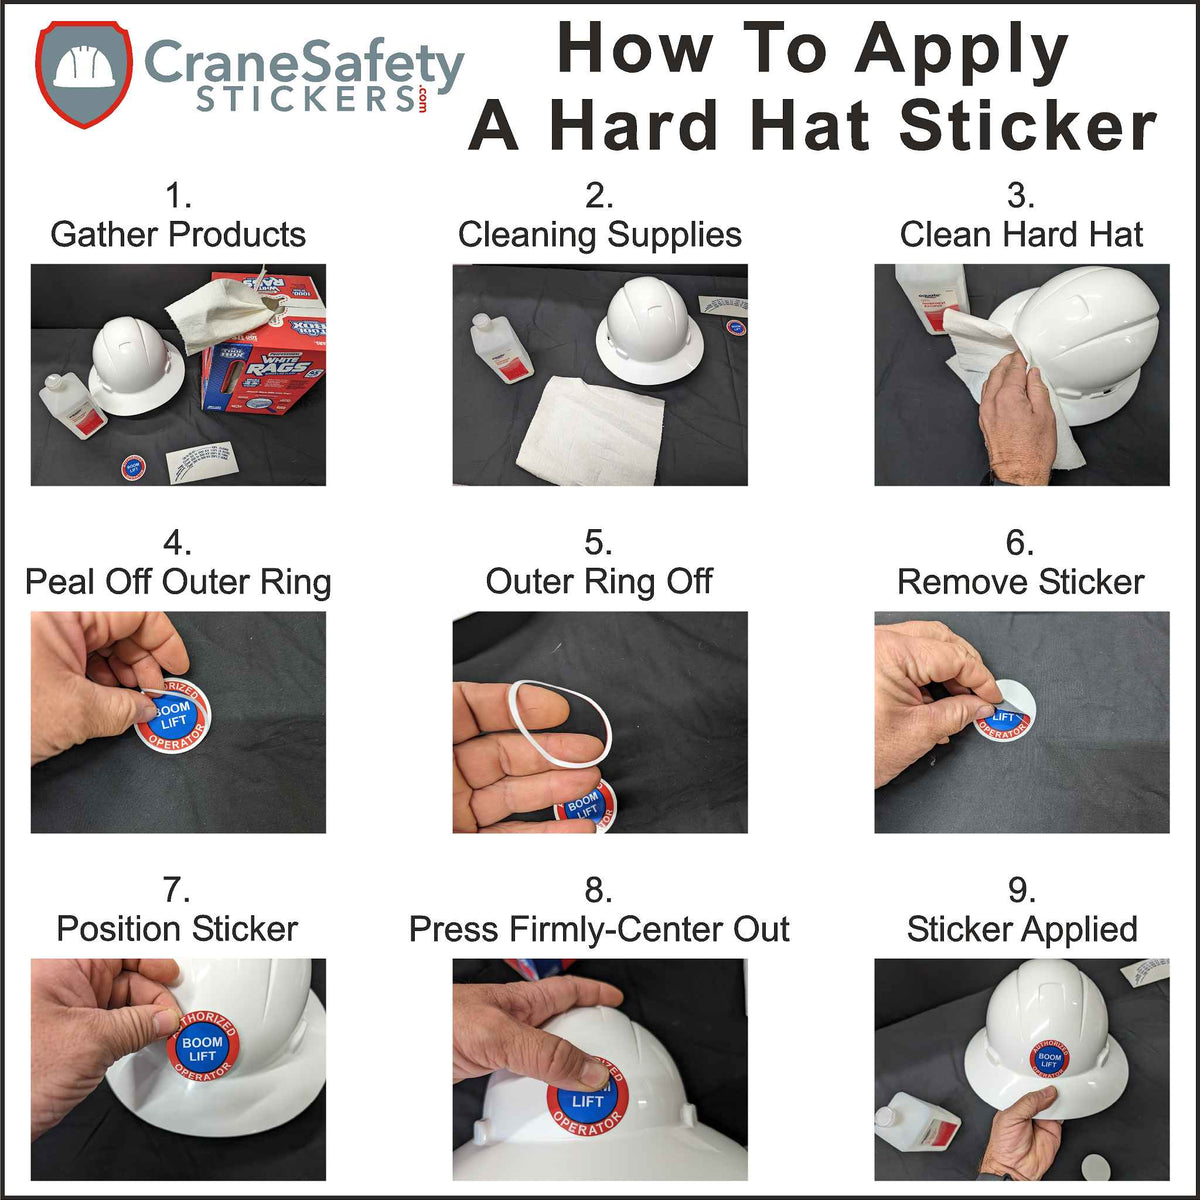 How To Apply Our One Step at a Time Towards Safety Sticker.